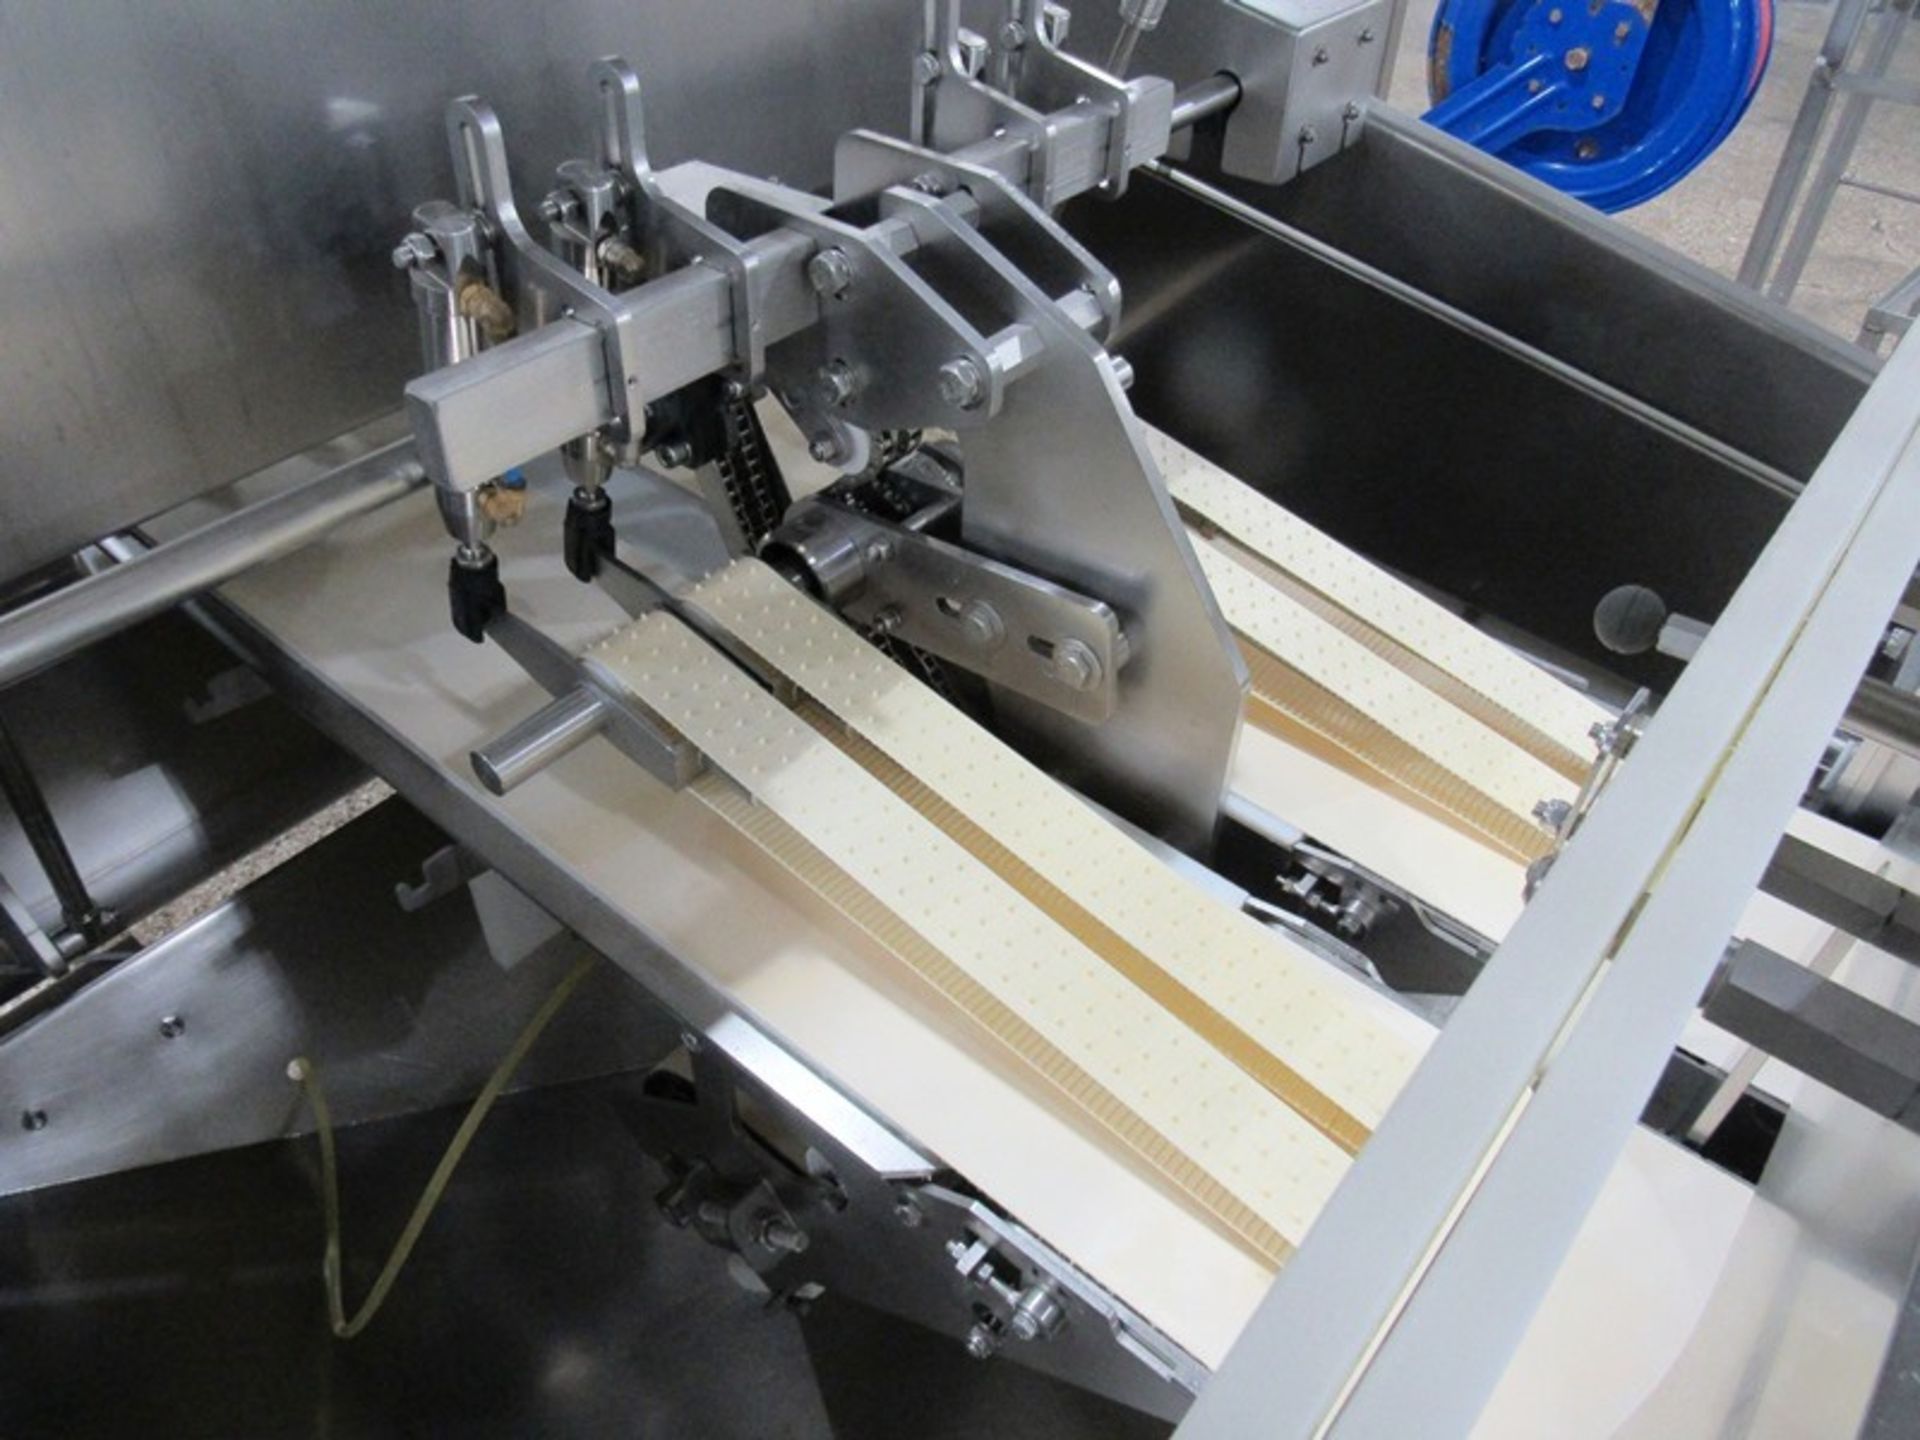 Marel I-Cut 22 Portion Cutter, touchscreen controls, Ser. #E011356, 230 volts, 3 phase, 8 KW, 50/ - Image 5 of 6